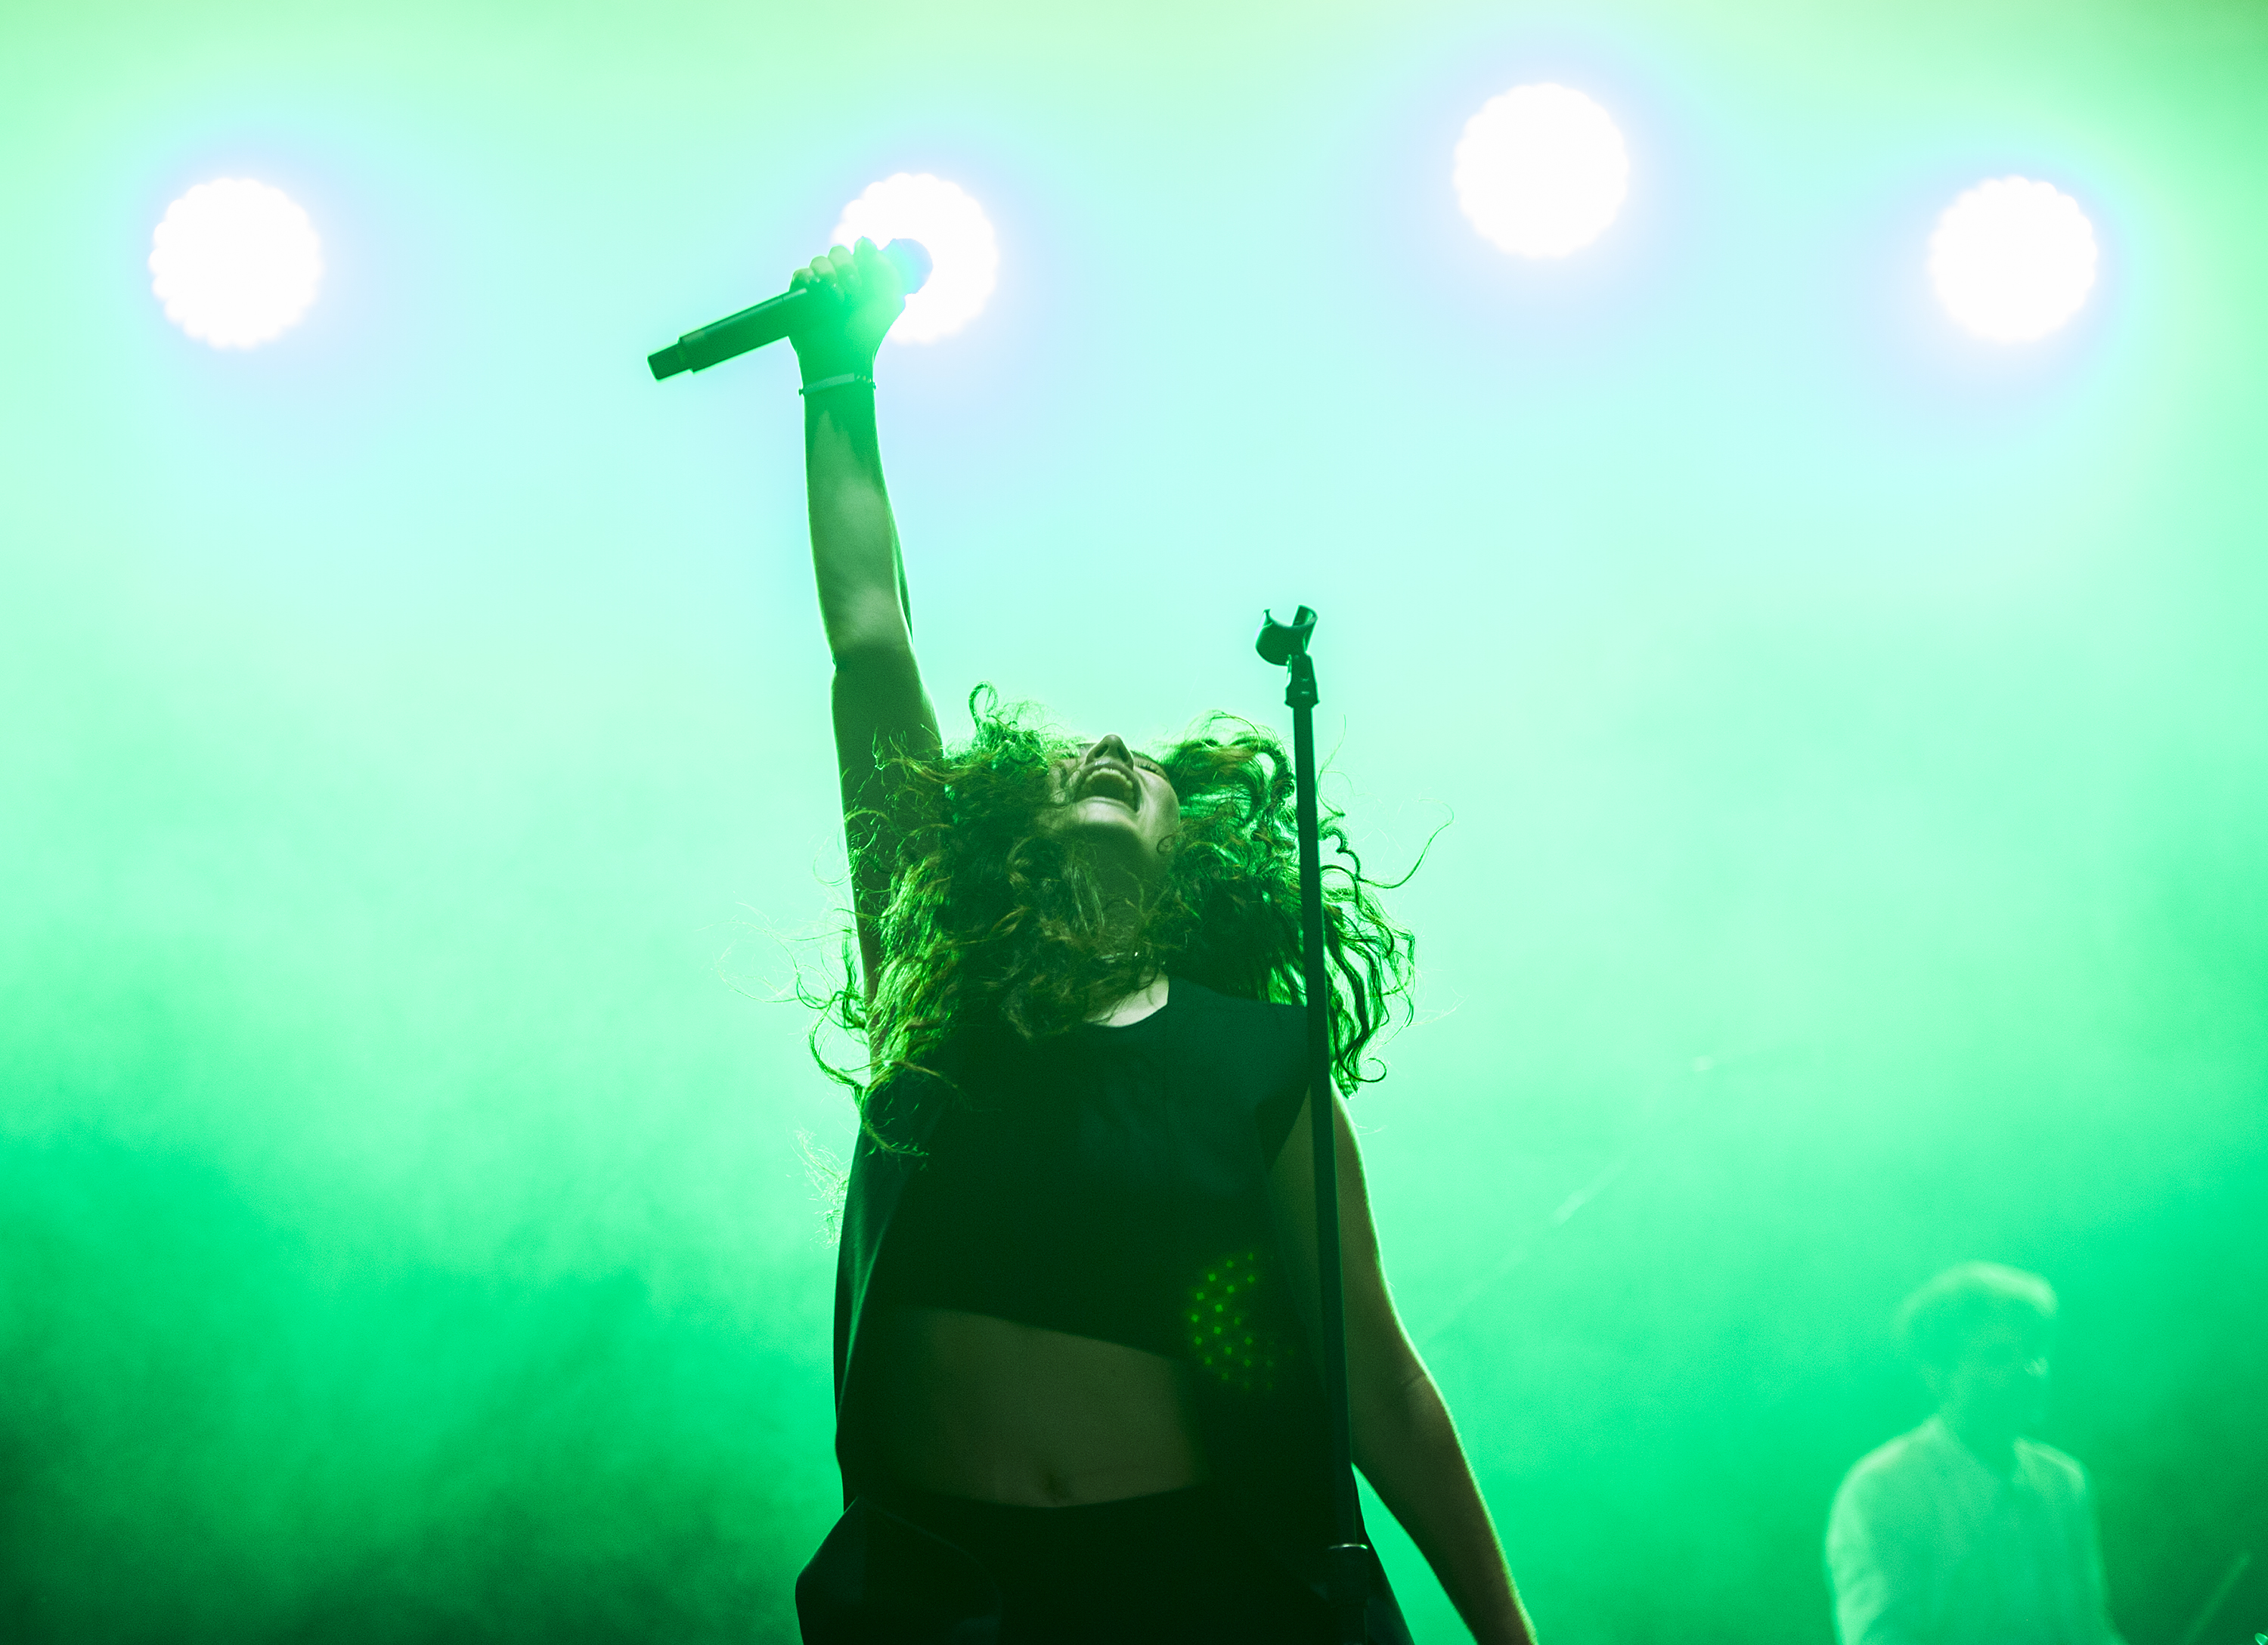 [MUSIC VIDEO] Lorde’s Back With Emotionally Charged Single “Green Light”